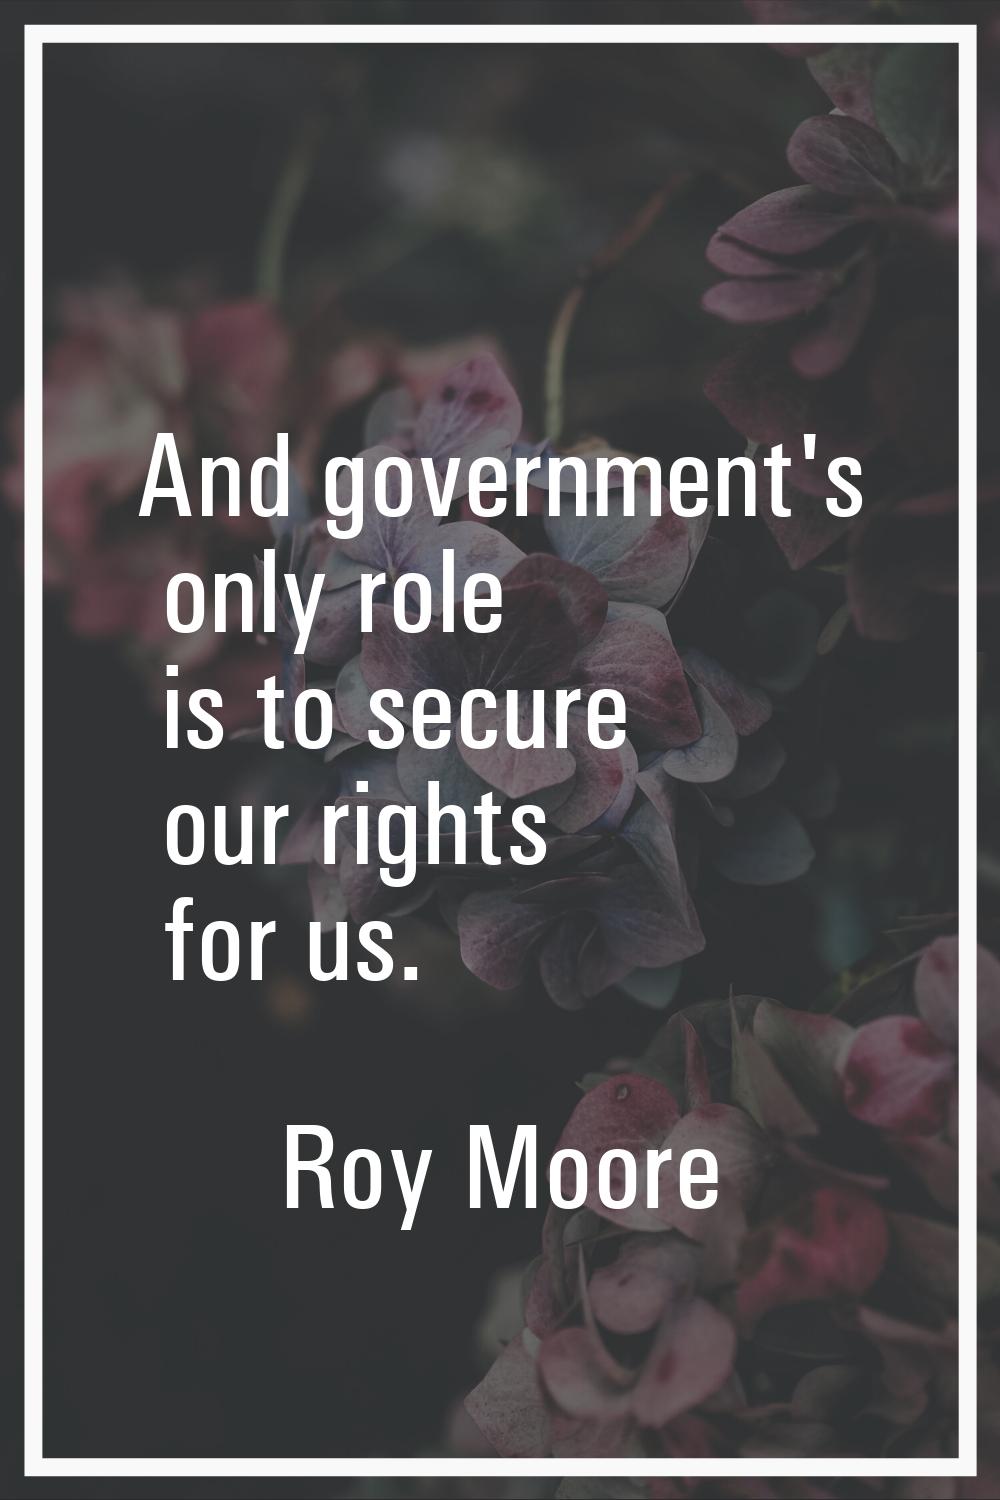 And government's only role is to secure our rights for us.